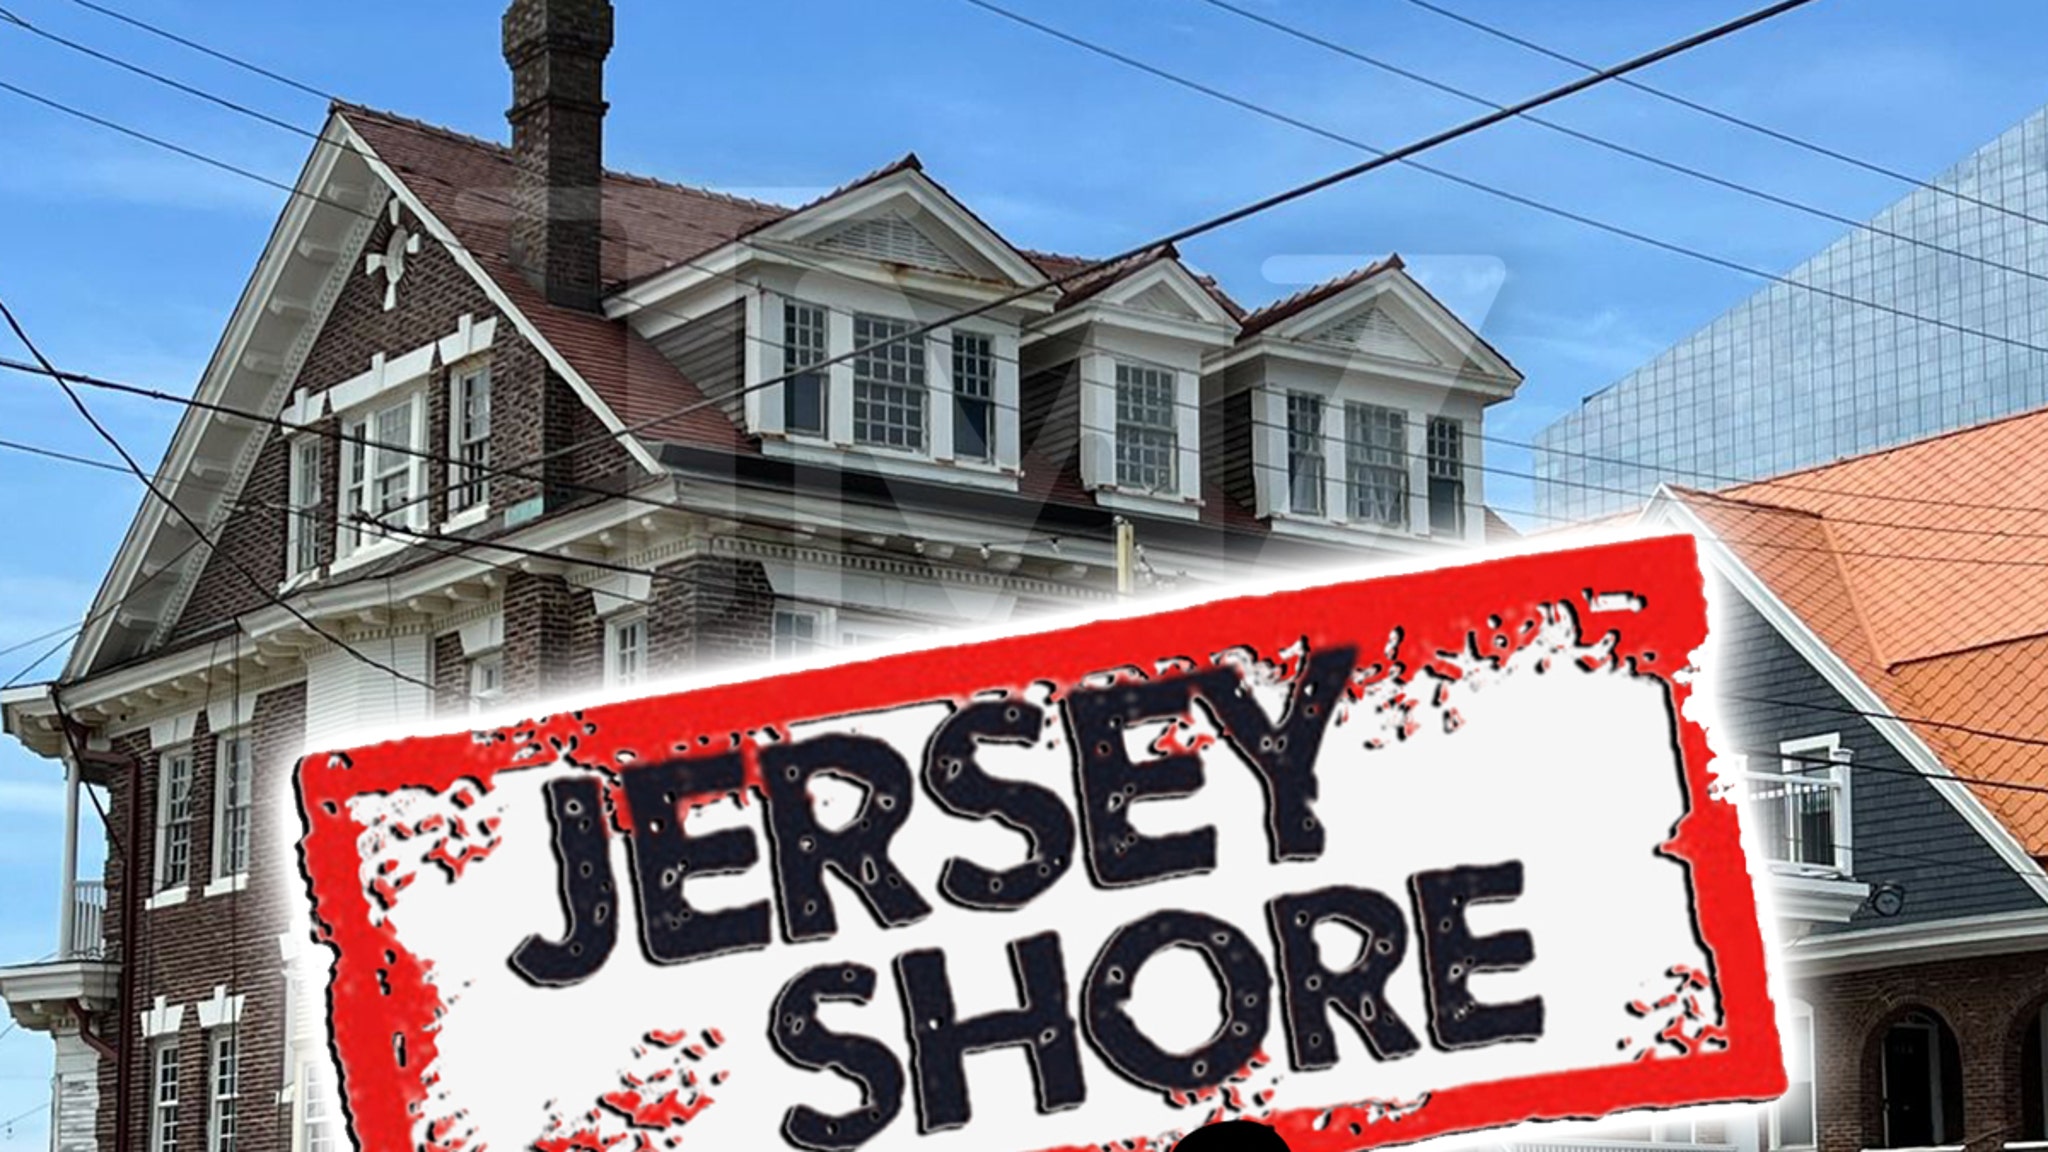 'Jersey Shore 2.0' Faced Serious Casting and Production Issues Before Pause thumbnail